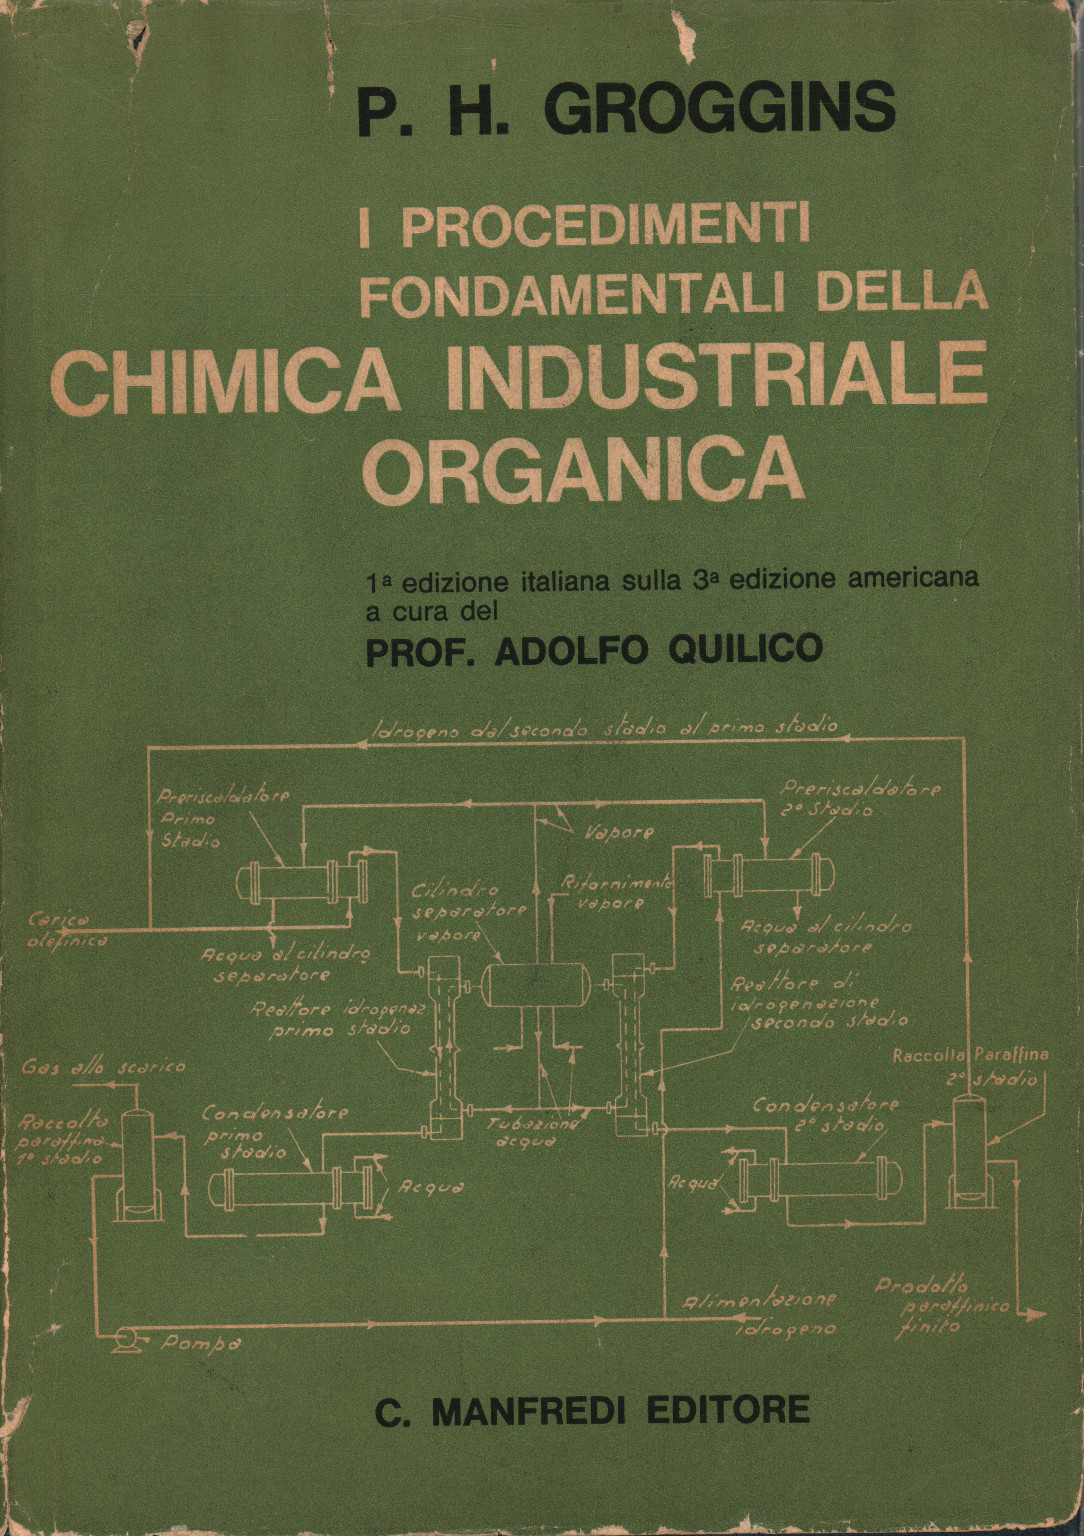 The fundamental processes of the chemical industry, s.a.